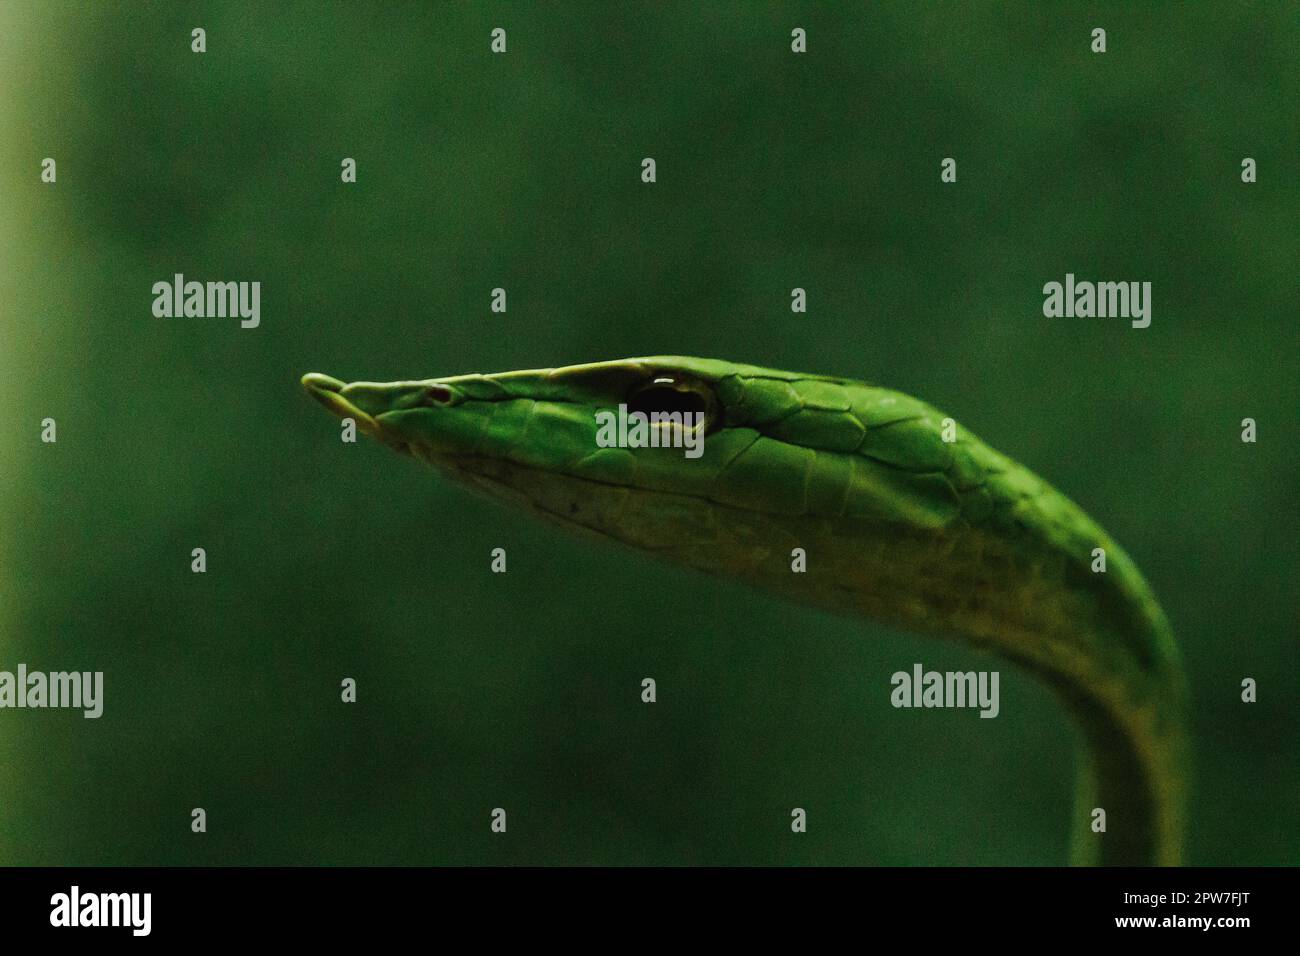 Long-nosed whip snake is a kind of poisonous snake Living most of the tree life Stock Photo